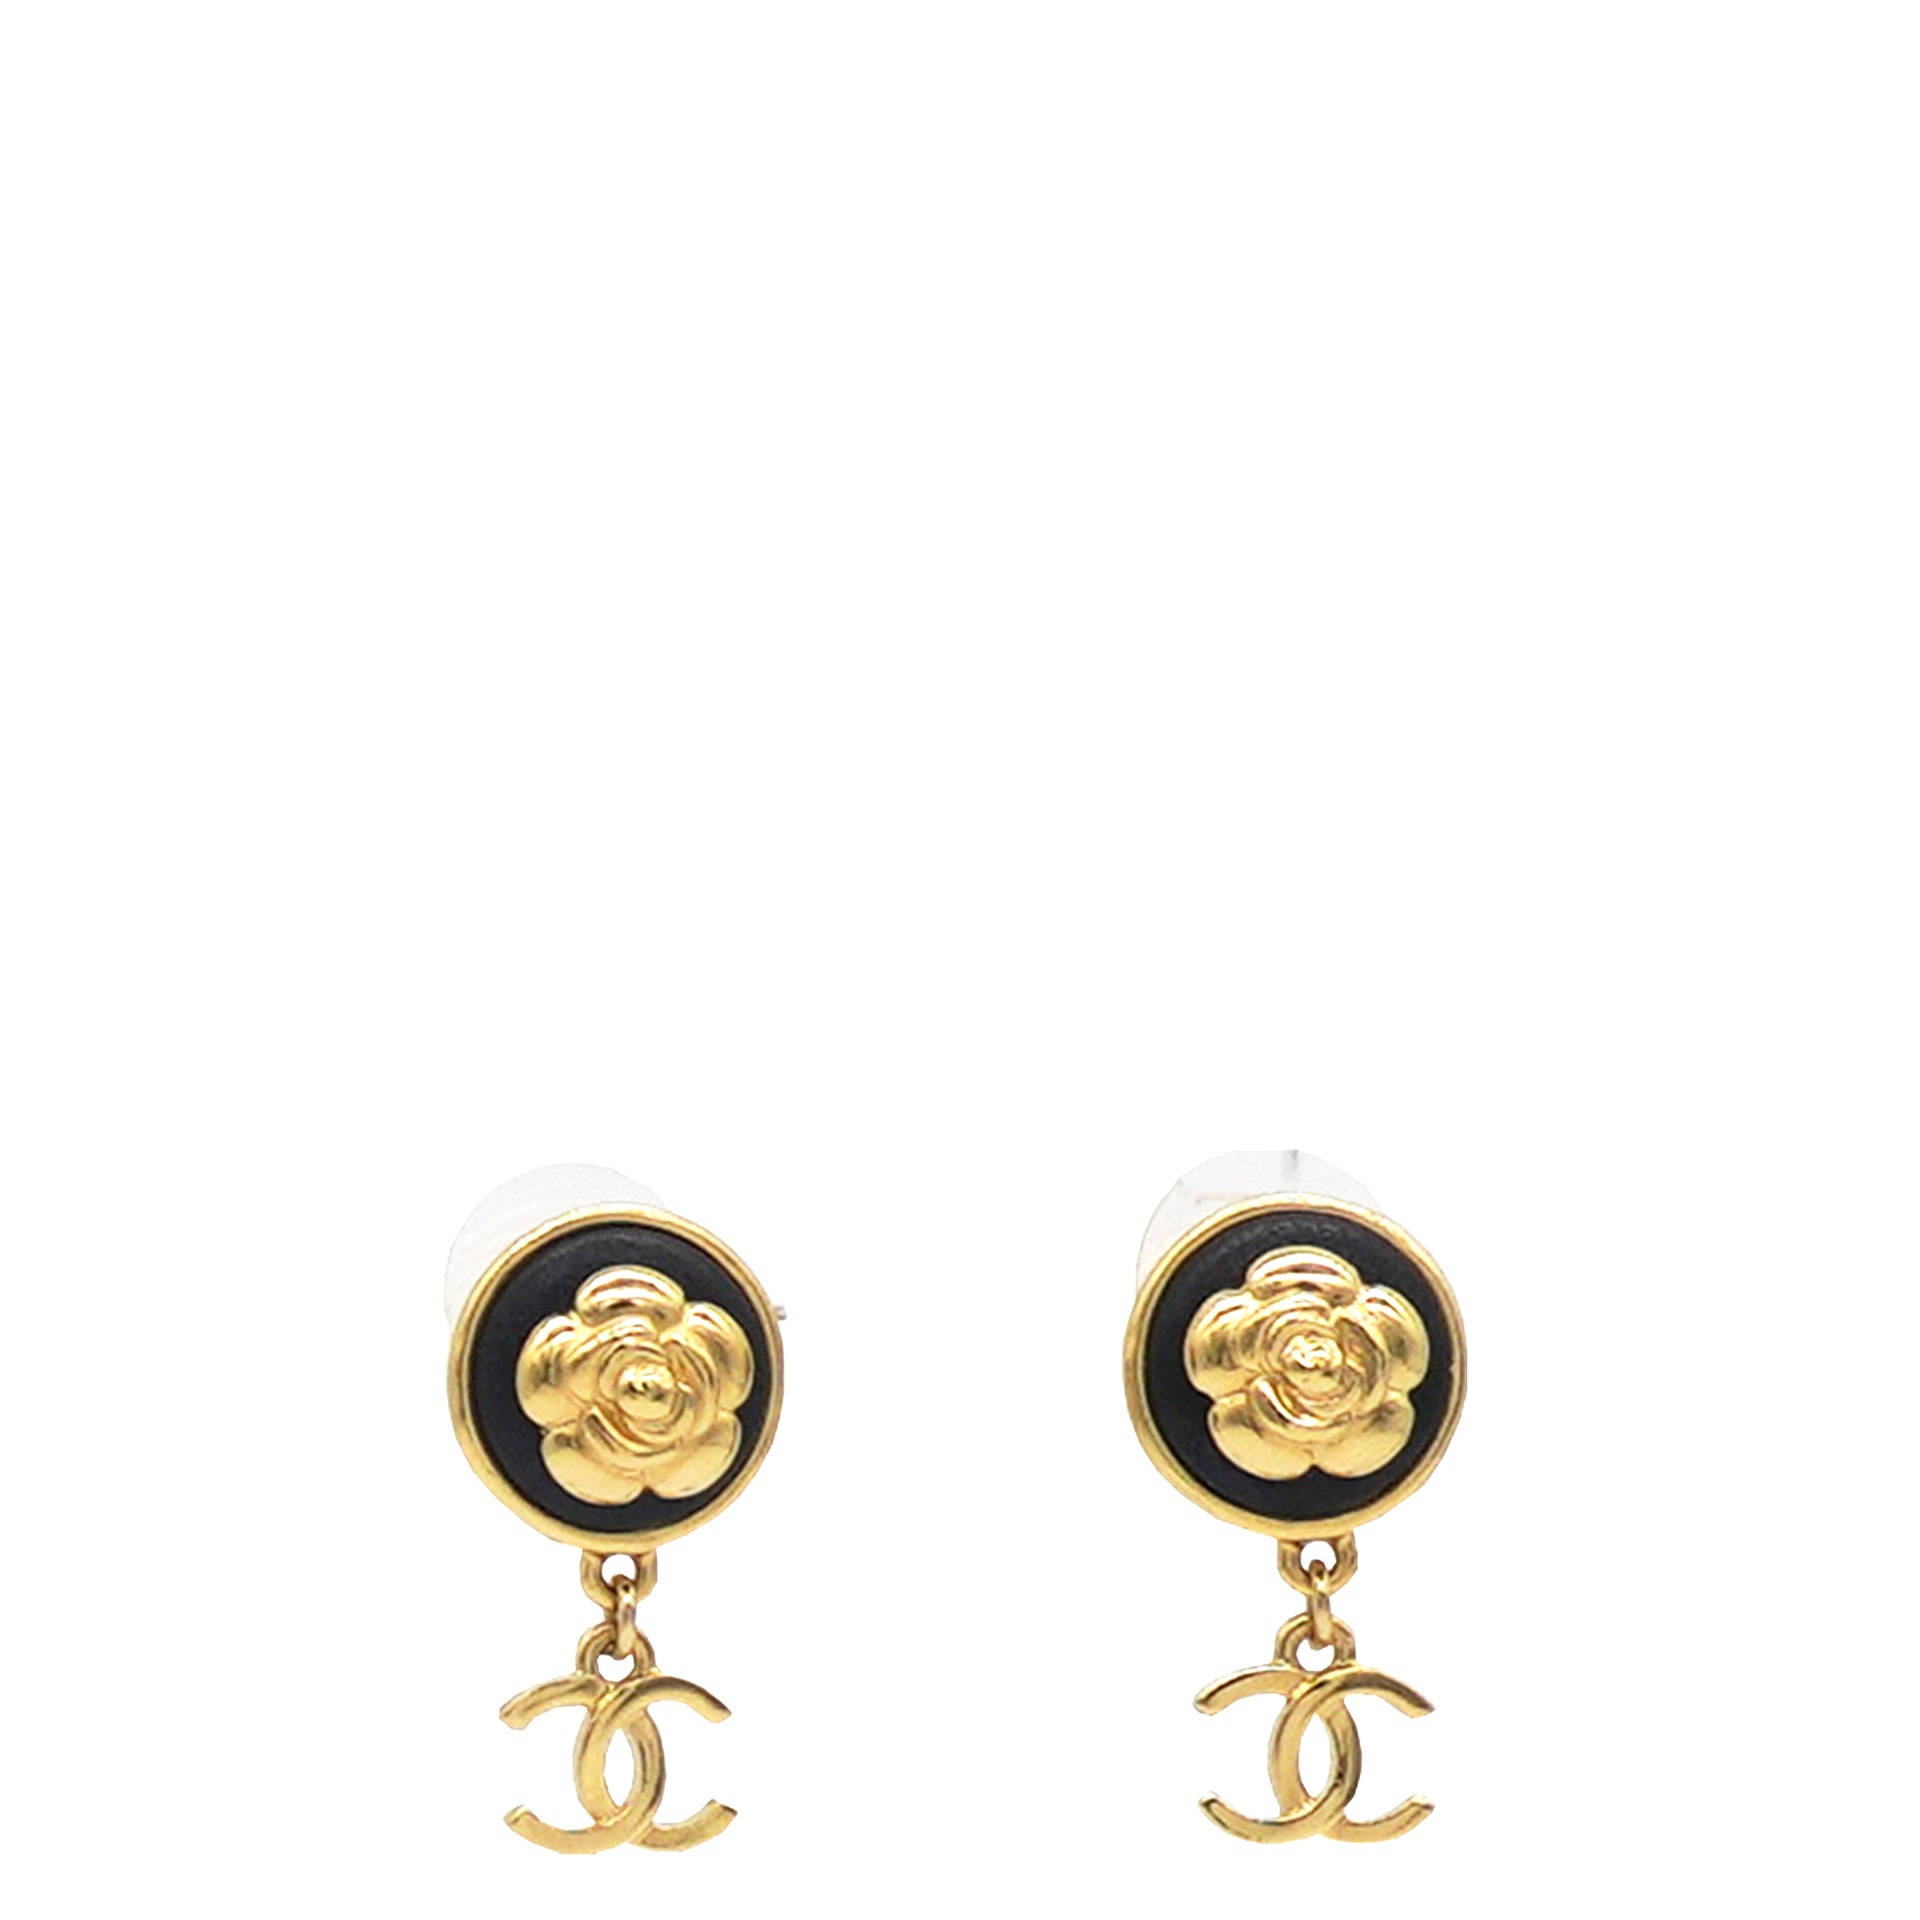 Chanel Crystal CC Braided Black Leather Earrings Light Gold Tone 20V  Coco  Approved Studio